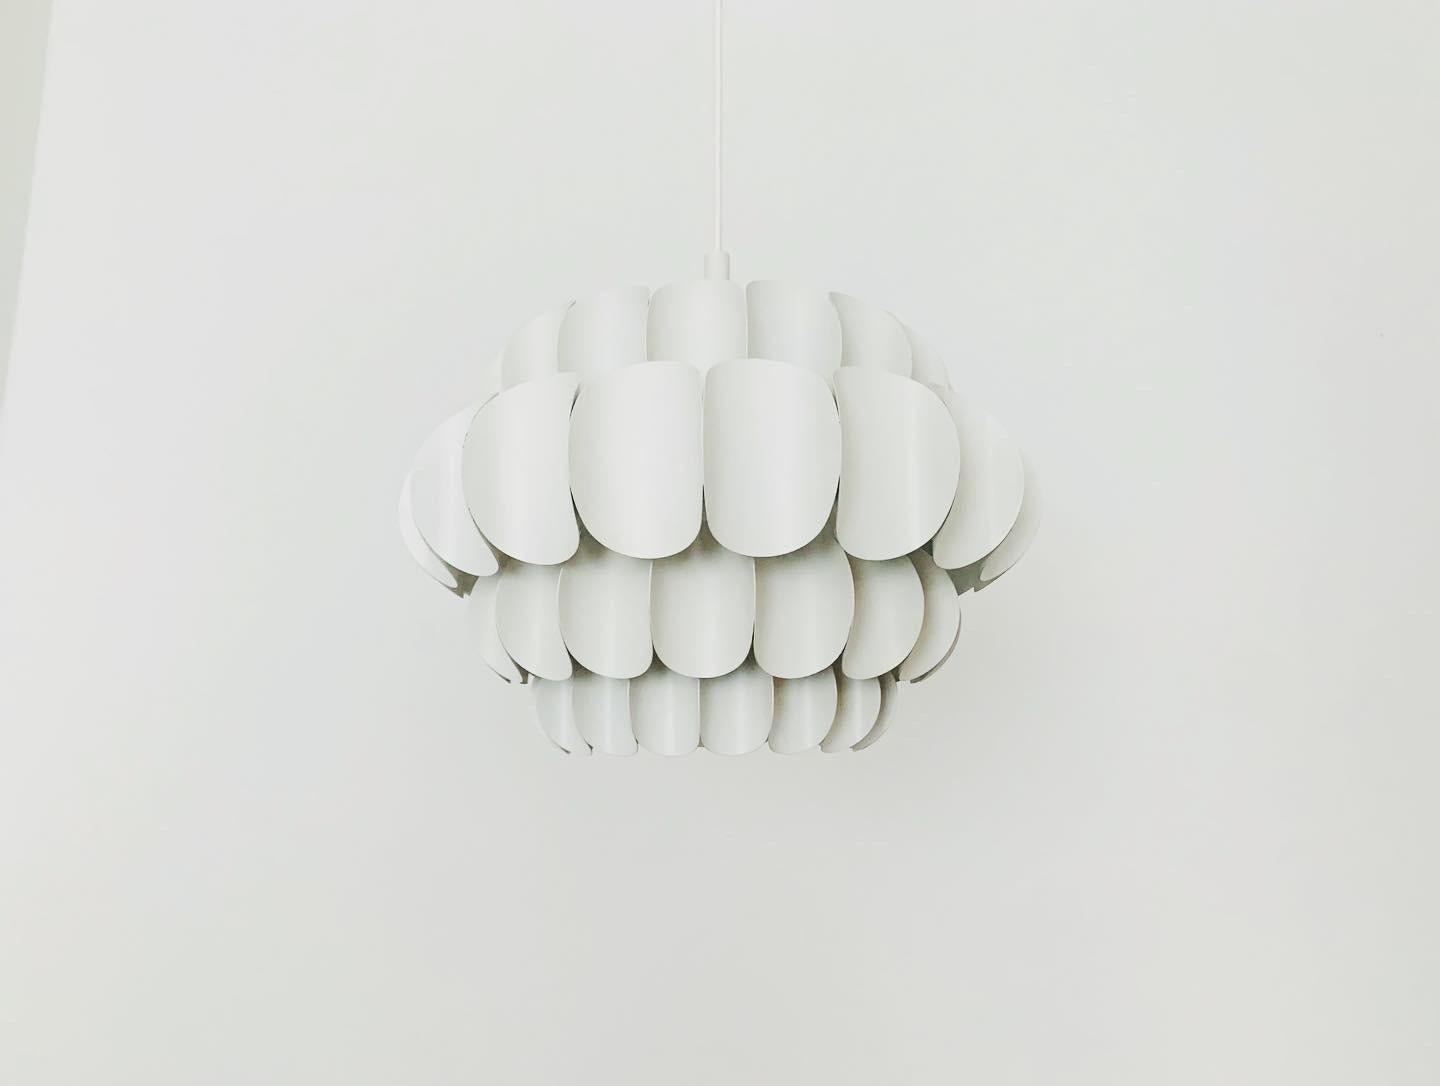 Wonderful white metal pendant lamp by Thorsten Orrling from the 1960s.
The extraordinary design creates a fantastic play of light in the room.
Rare version with 4 rows.

Condition:

Very good vintage condition with slight signs of wear consistent